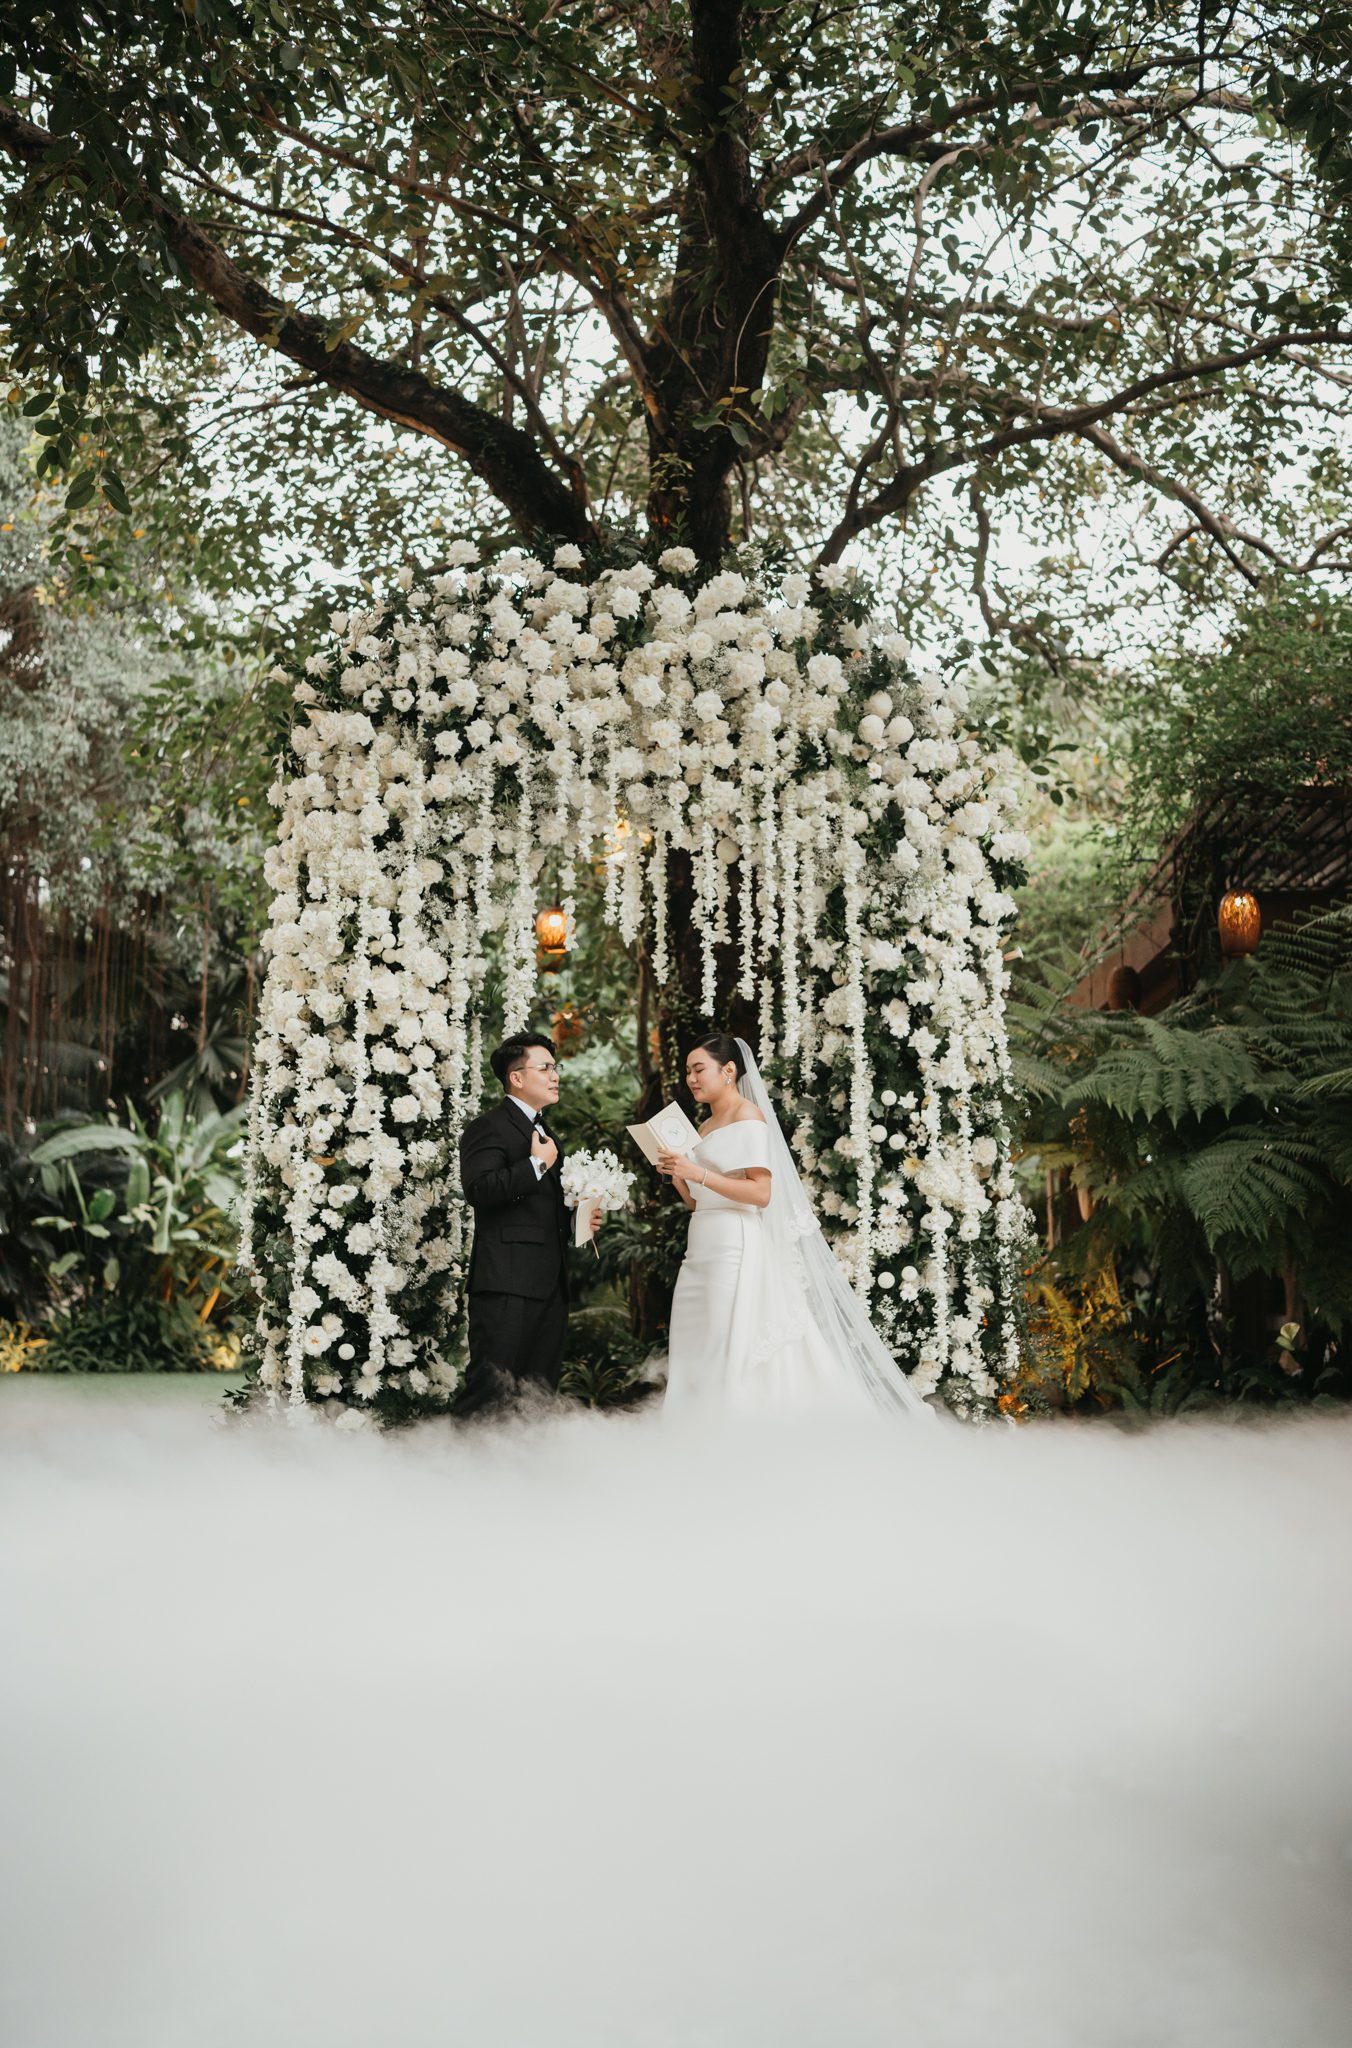 Saigon intimate wedding at An Lam Retreat 4571 - The Planners